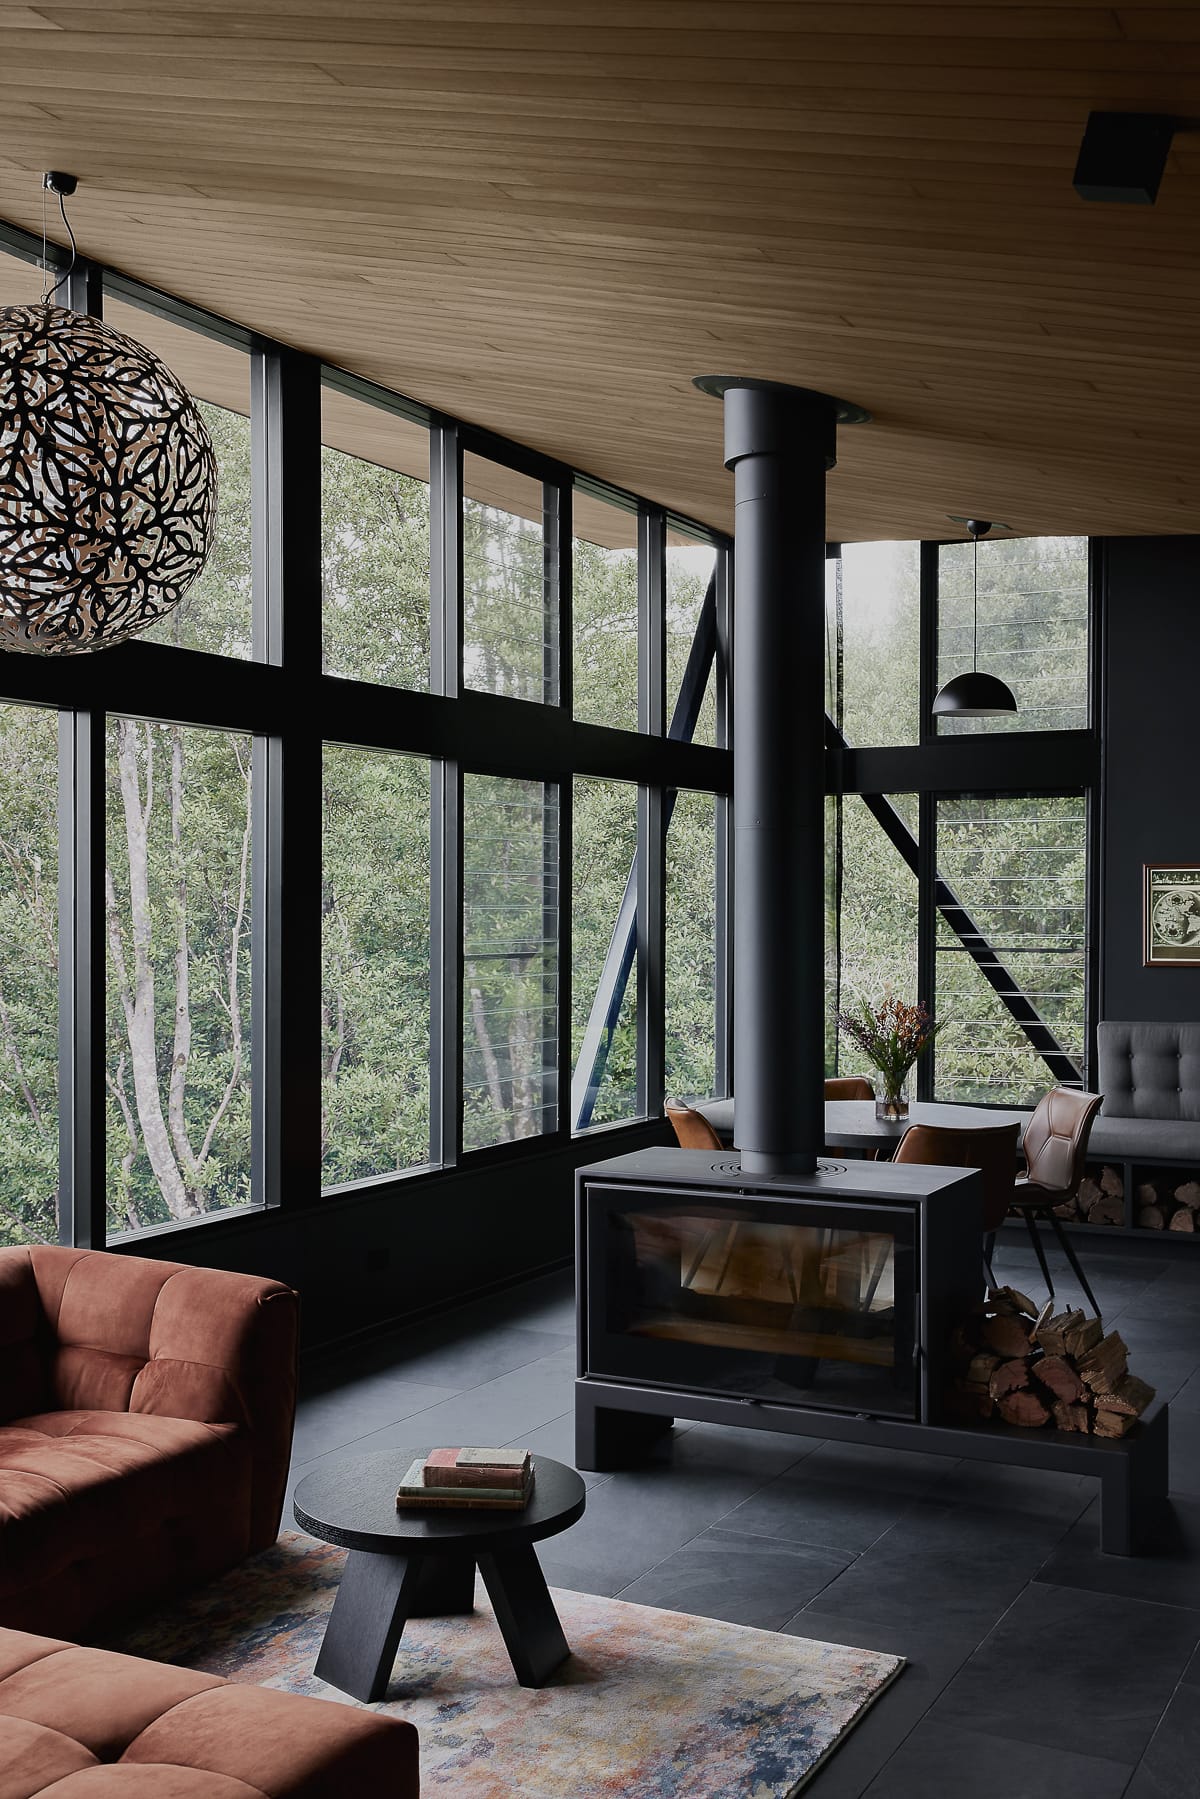 Cloudview Springbrook by Paul Uhlmann Architects. Photography by Brock Beazley. Contemporary living space with black floor tiles and black framed windows that overlook a rainforest. Black fireplace in centre of room. 